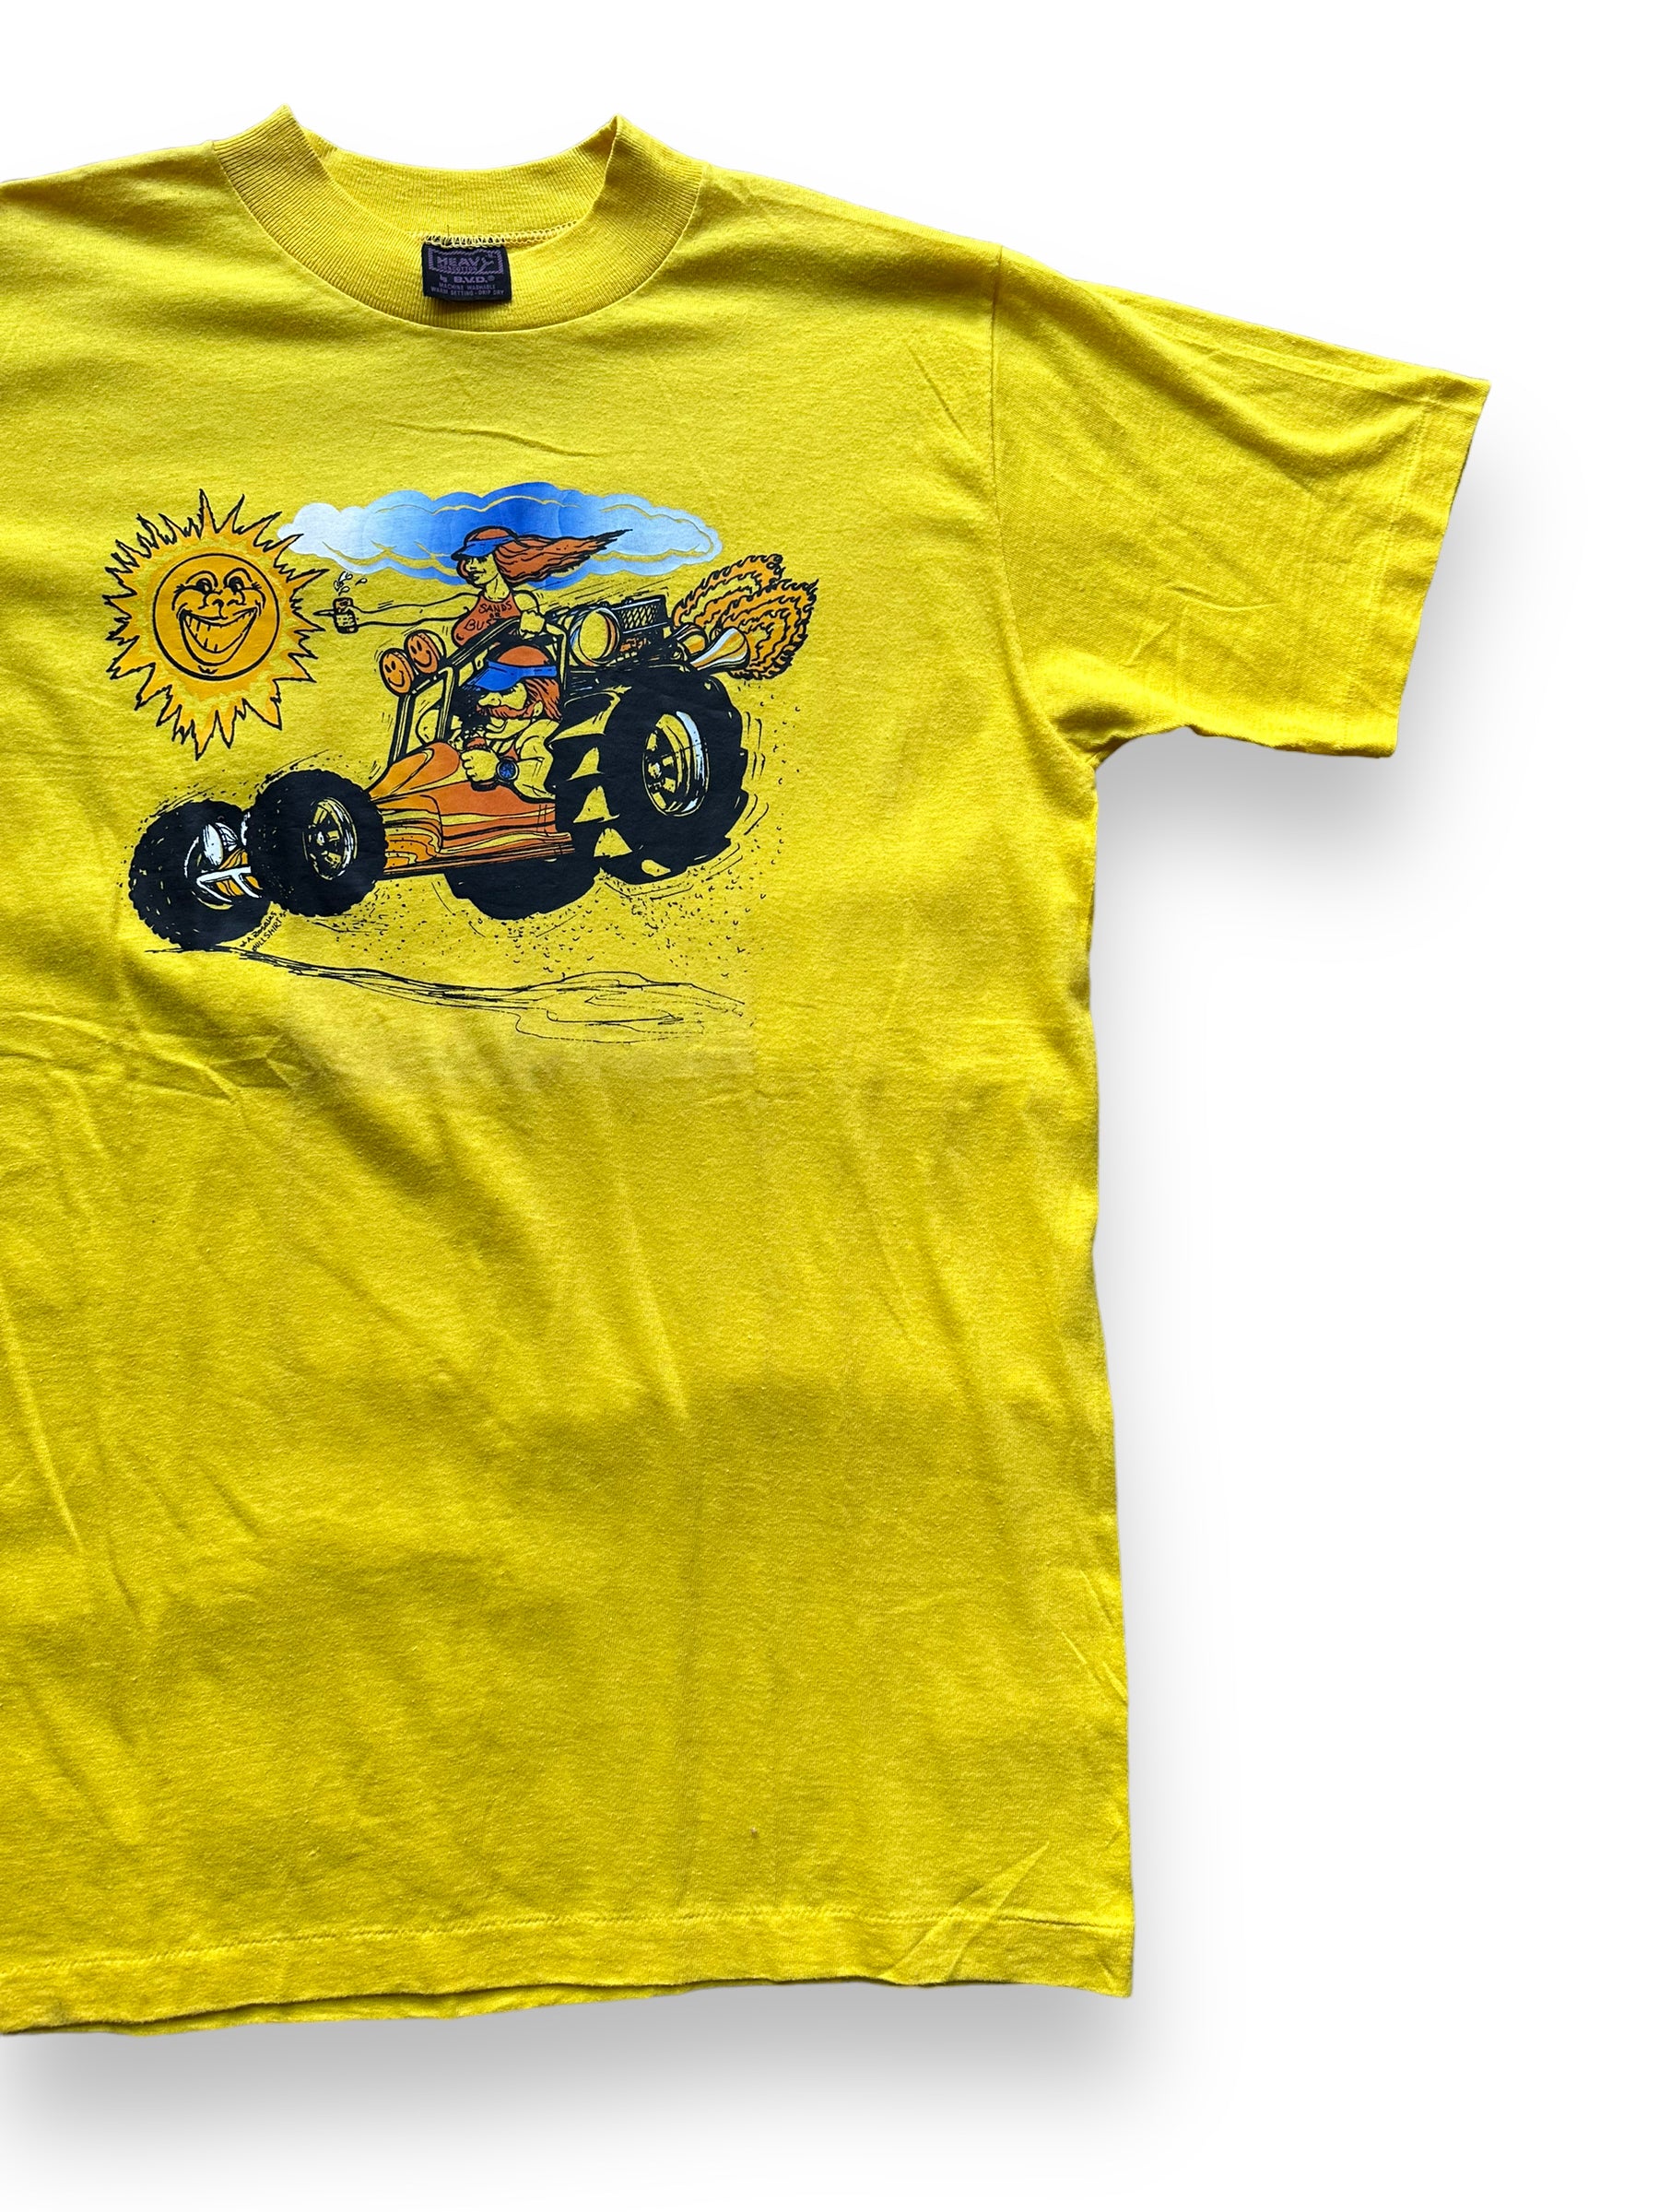 Front Left View of Vintage Dune Buggy Graphic Tee SZ L | Vintage Bull Shirt Graphic T-Shirts Seattle | Barn Owl Vintage Tees Seattle